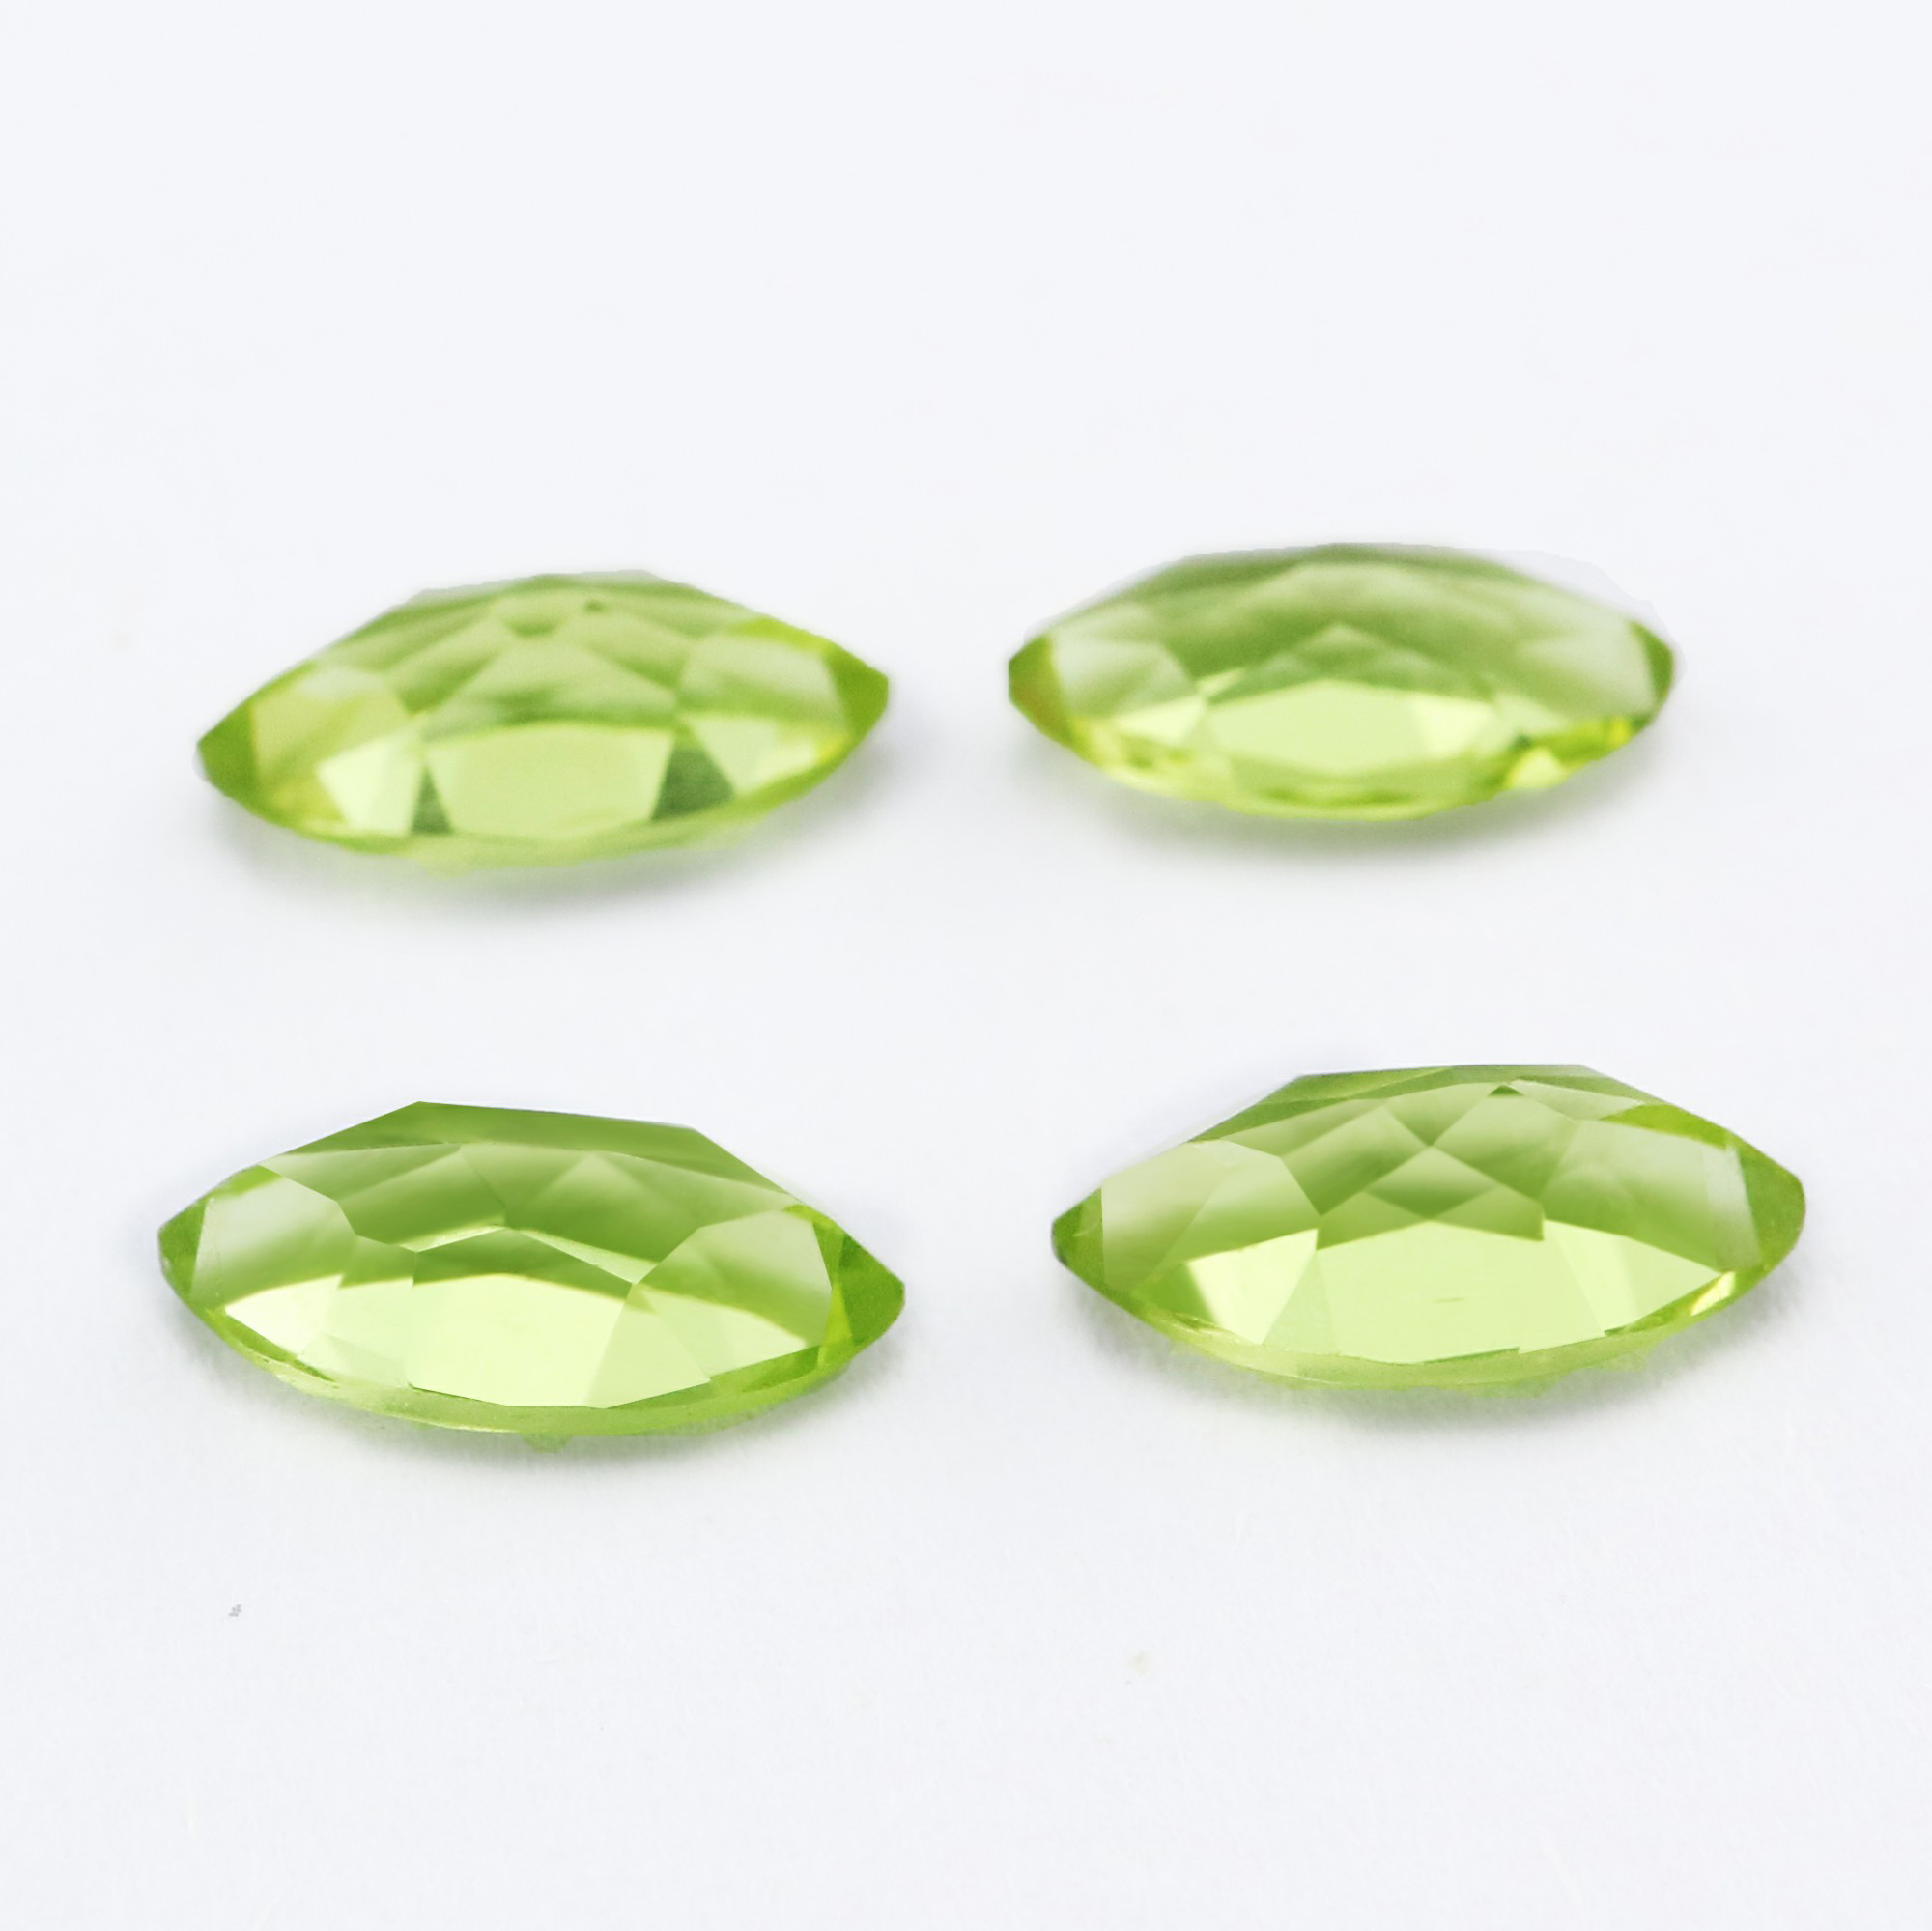 5Pcs Marquise Green Peridot August Birthstone Faceted Cut Loose Gemstone Natural Semi Precious Stone DIY Jewelry Supplies 4120130 - Click Image to Close